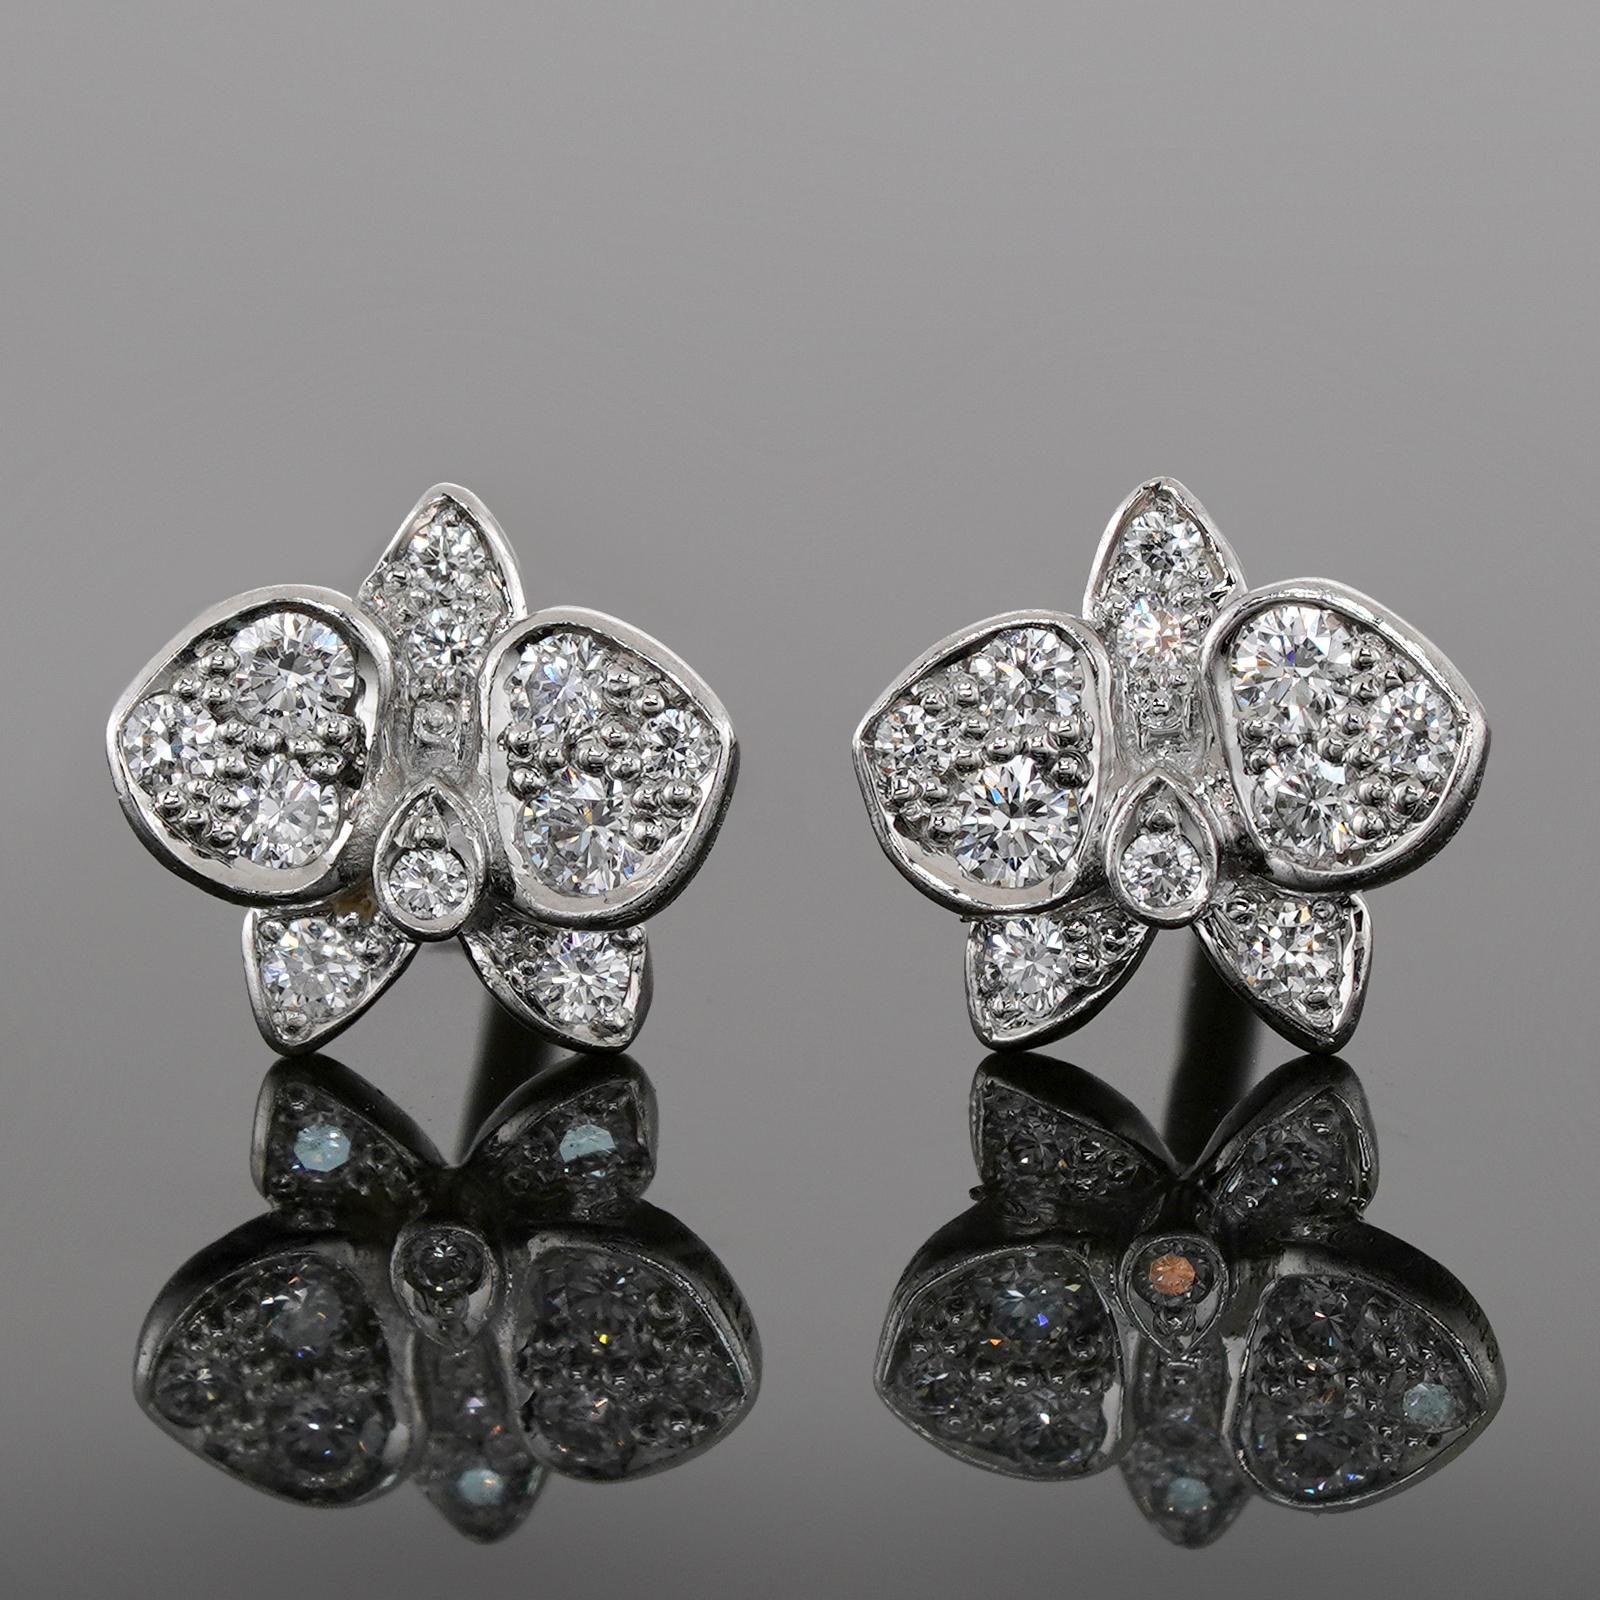 These exquisite stud earrings from Cartier's Caresse D'orchidees collection feature a delicate flower design crafted in 18k white gold and set with round brilliant D-E-F VVS1-VVS2 diamonds. This is the mini model of the earrings. Made in France